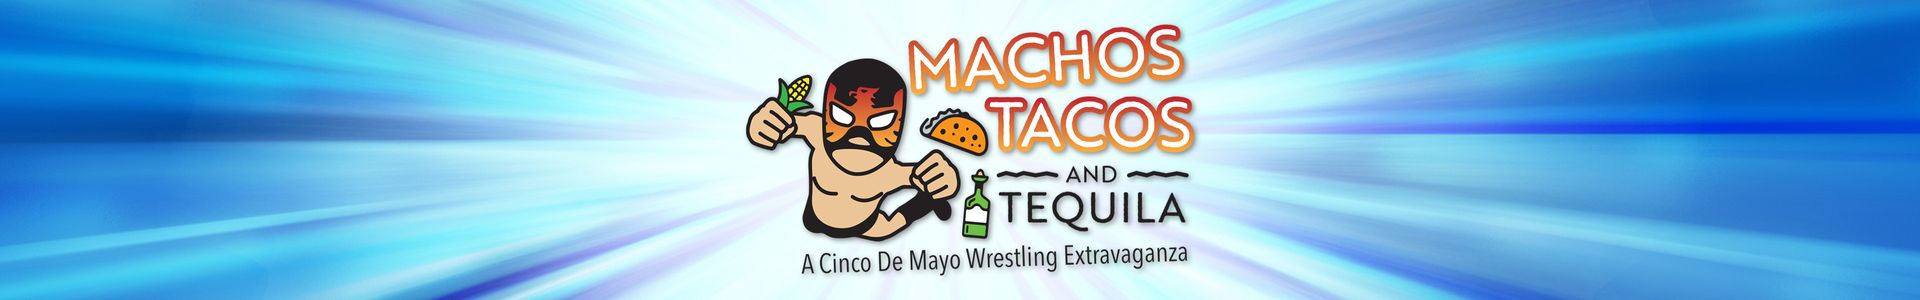 Machos, Tacos and Tequila